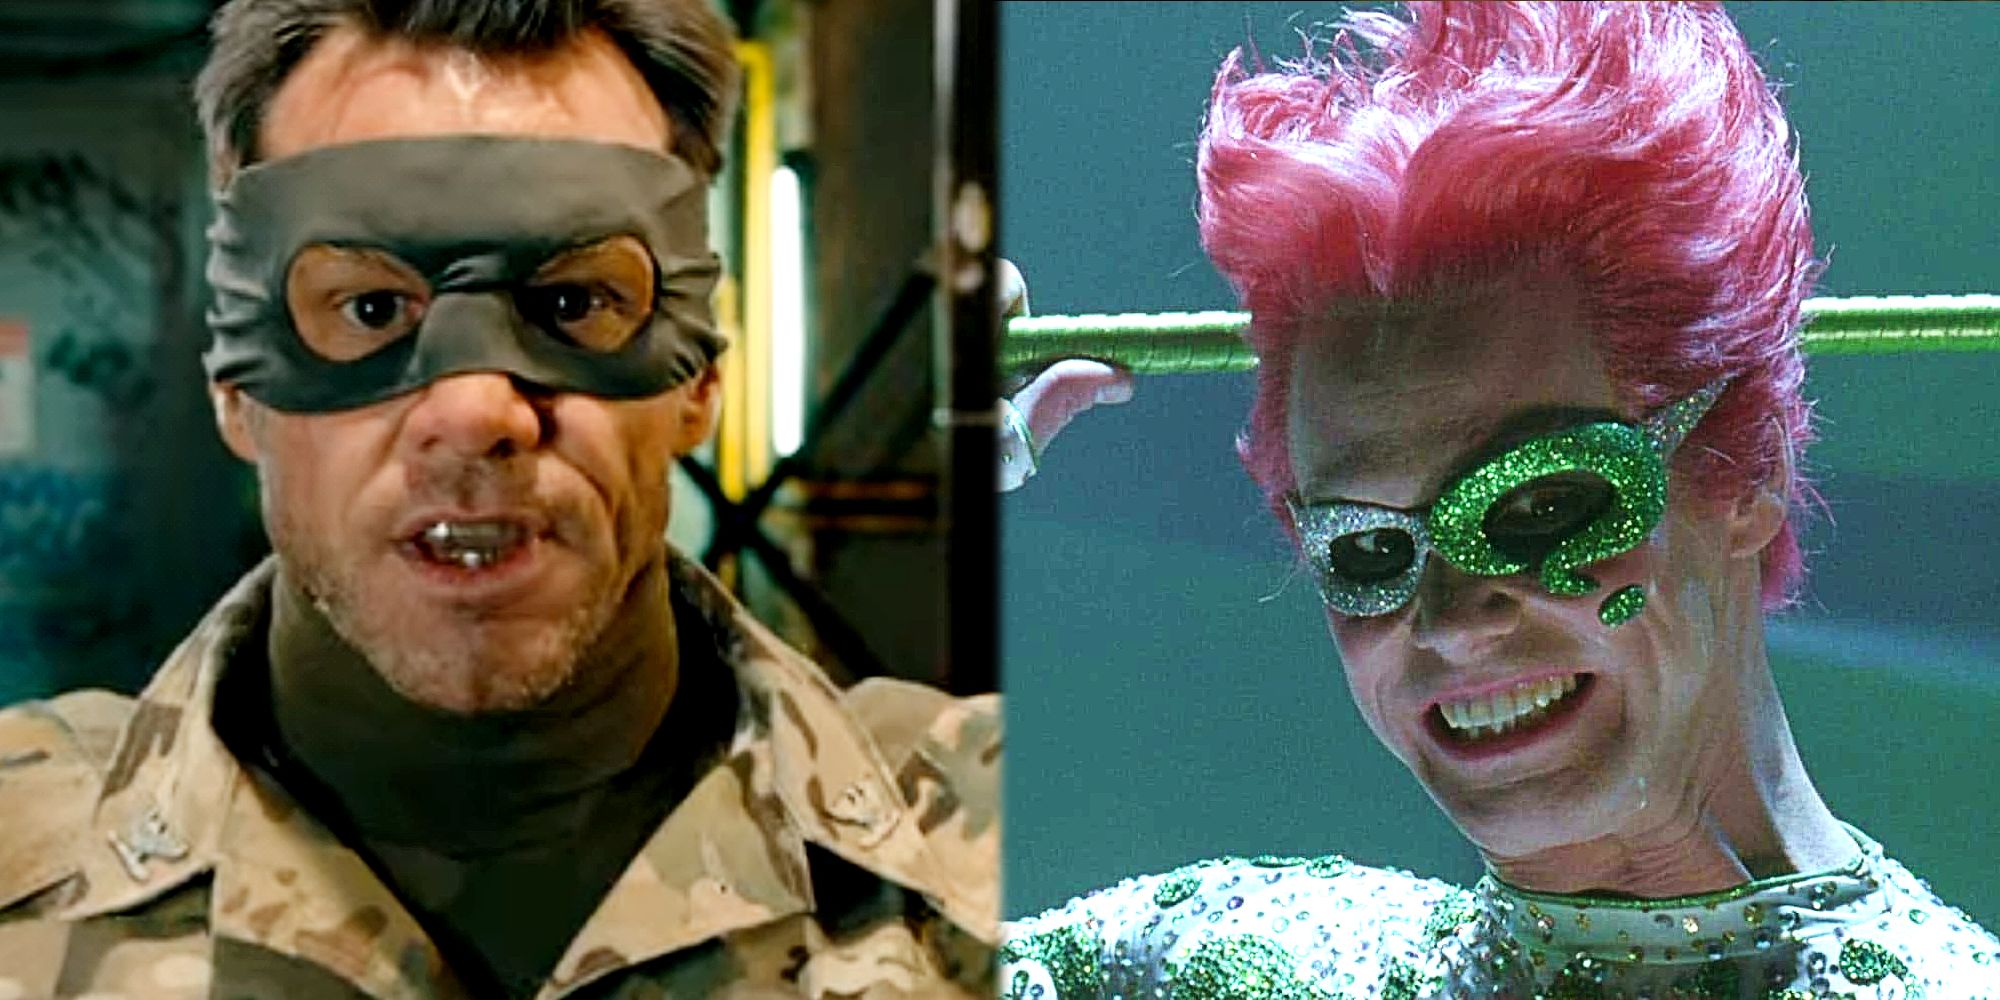 Jim Carrey as Colonel Stars in Kick-Ass 2 and The Riddler in Batman Forever